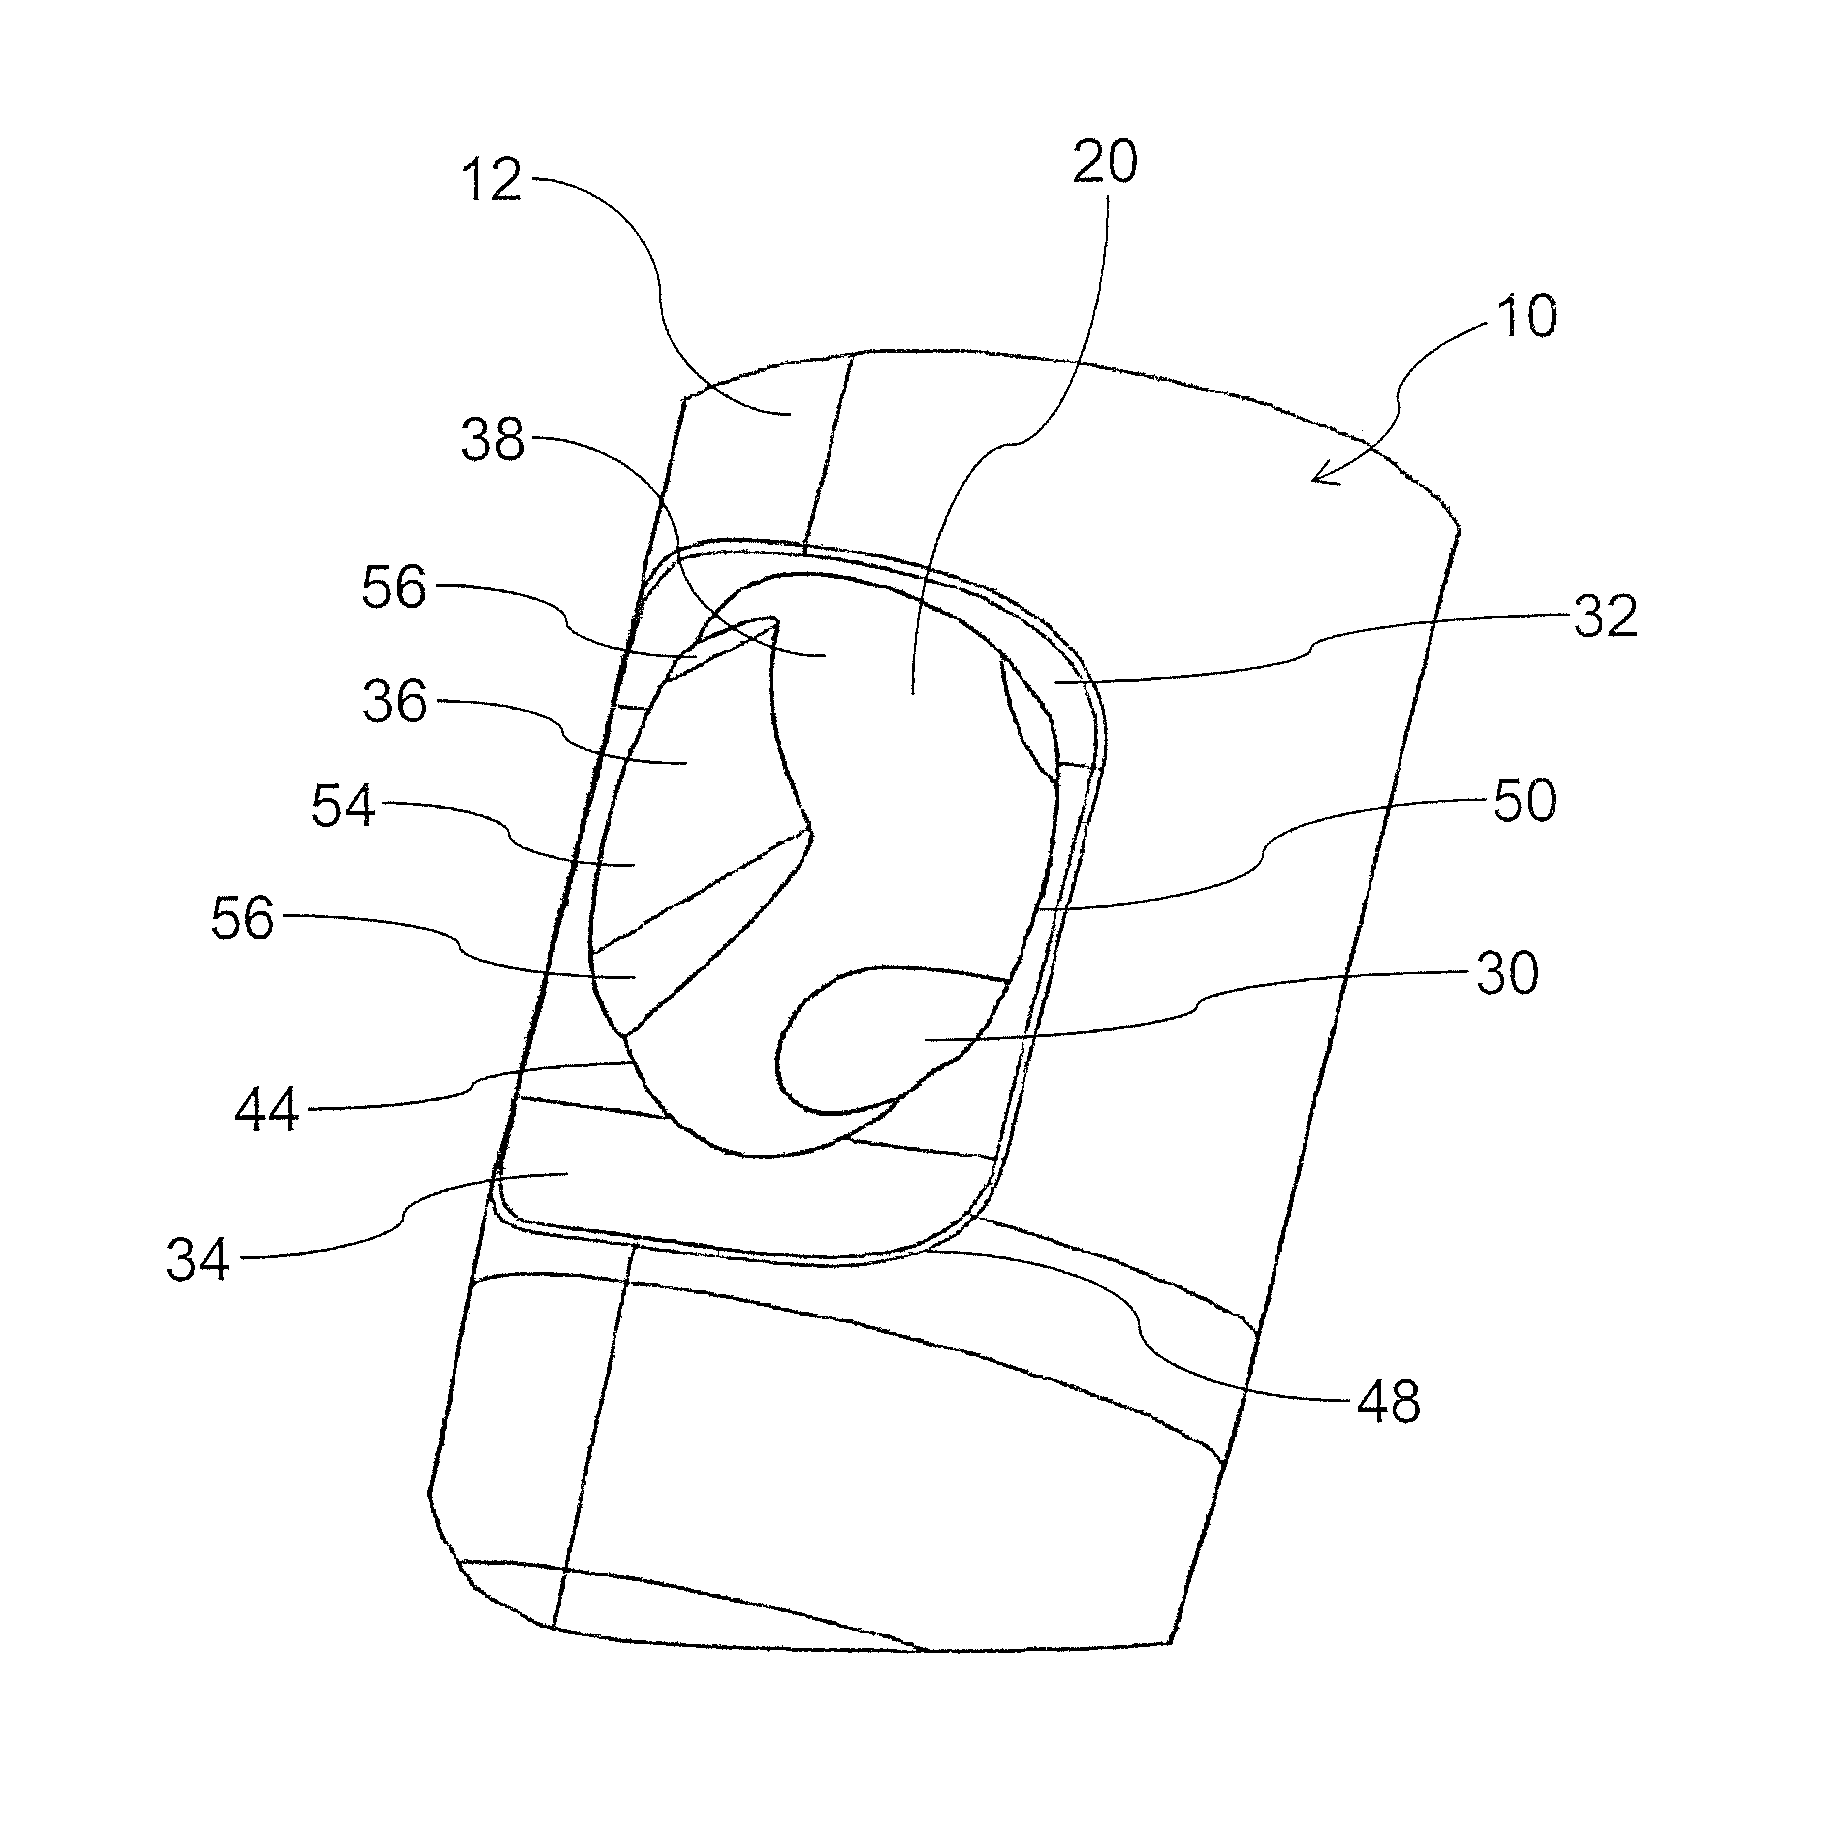 Intramedullary nail and implant system comprising the nail